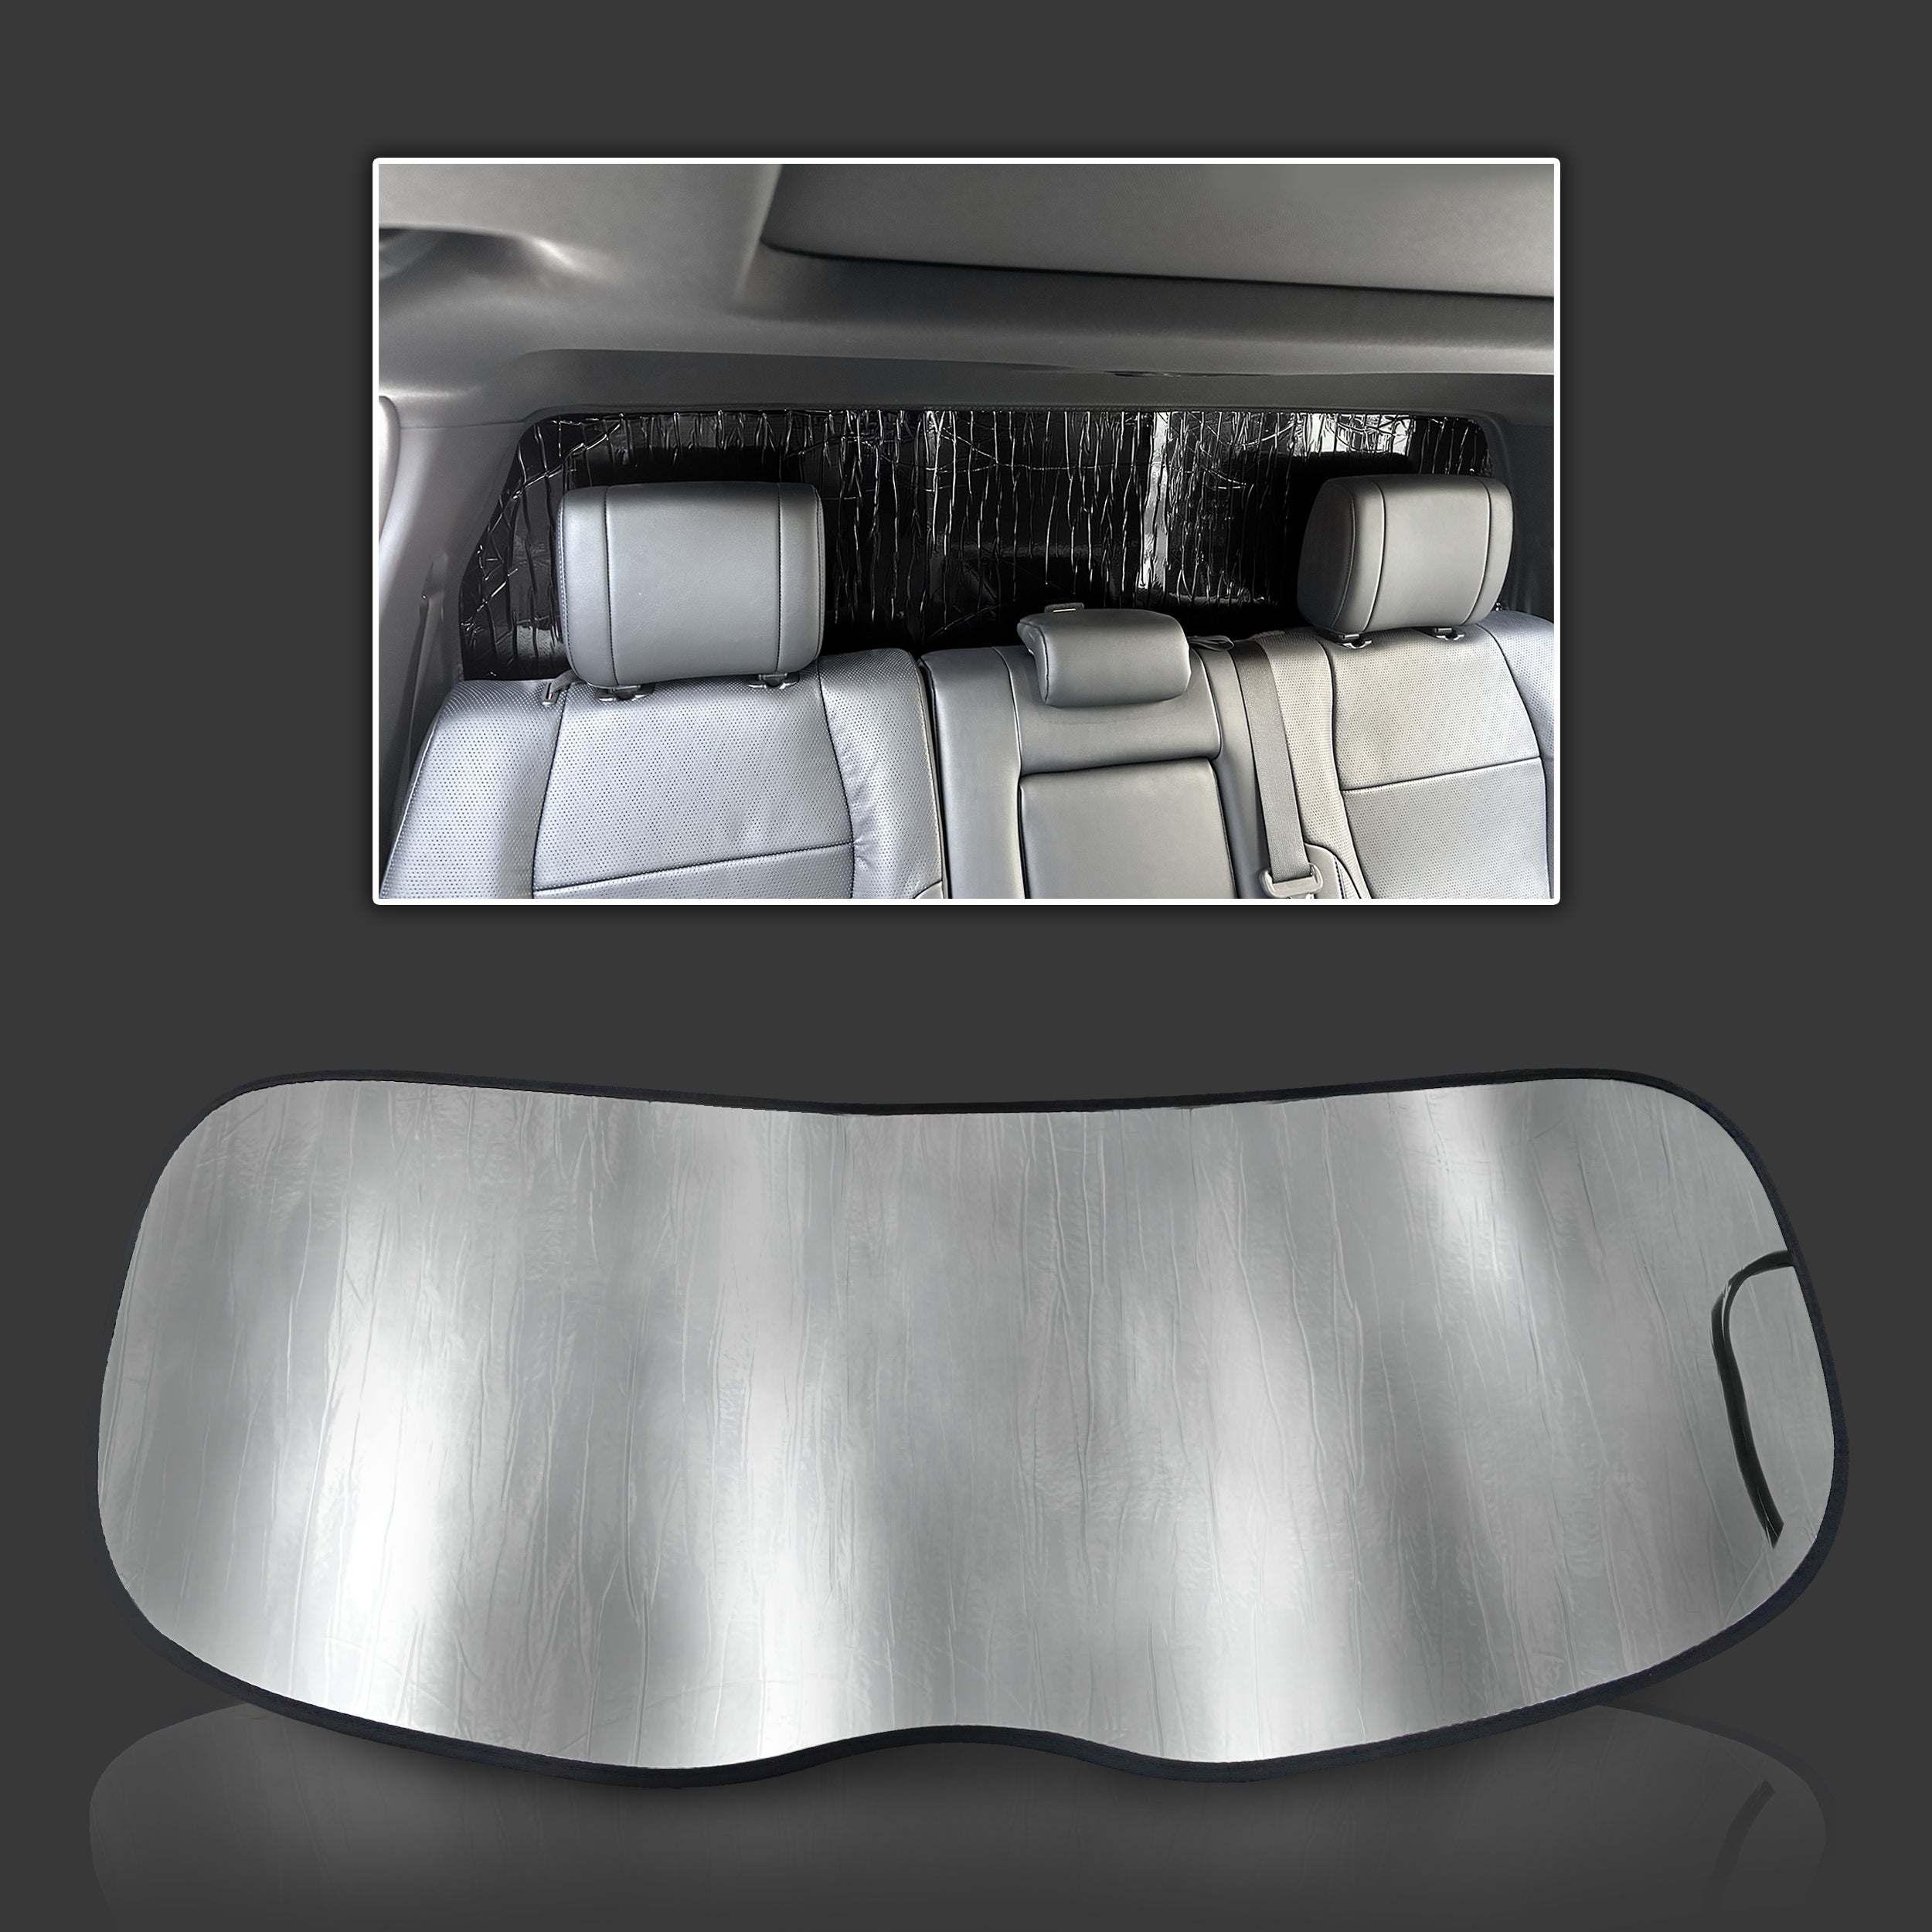 Sunshades for 2022-2024 Toyota Tundra Pickup (View for more options)